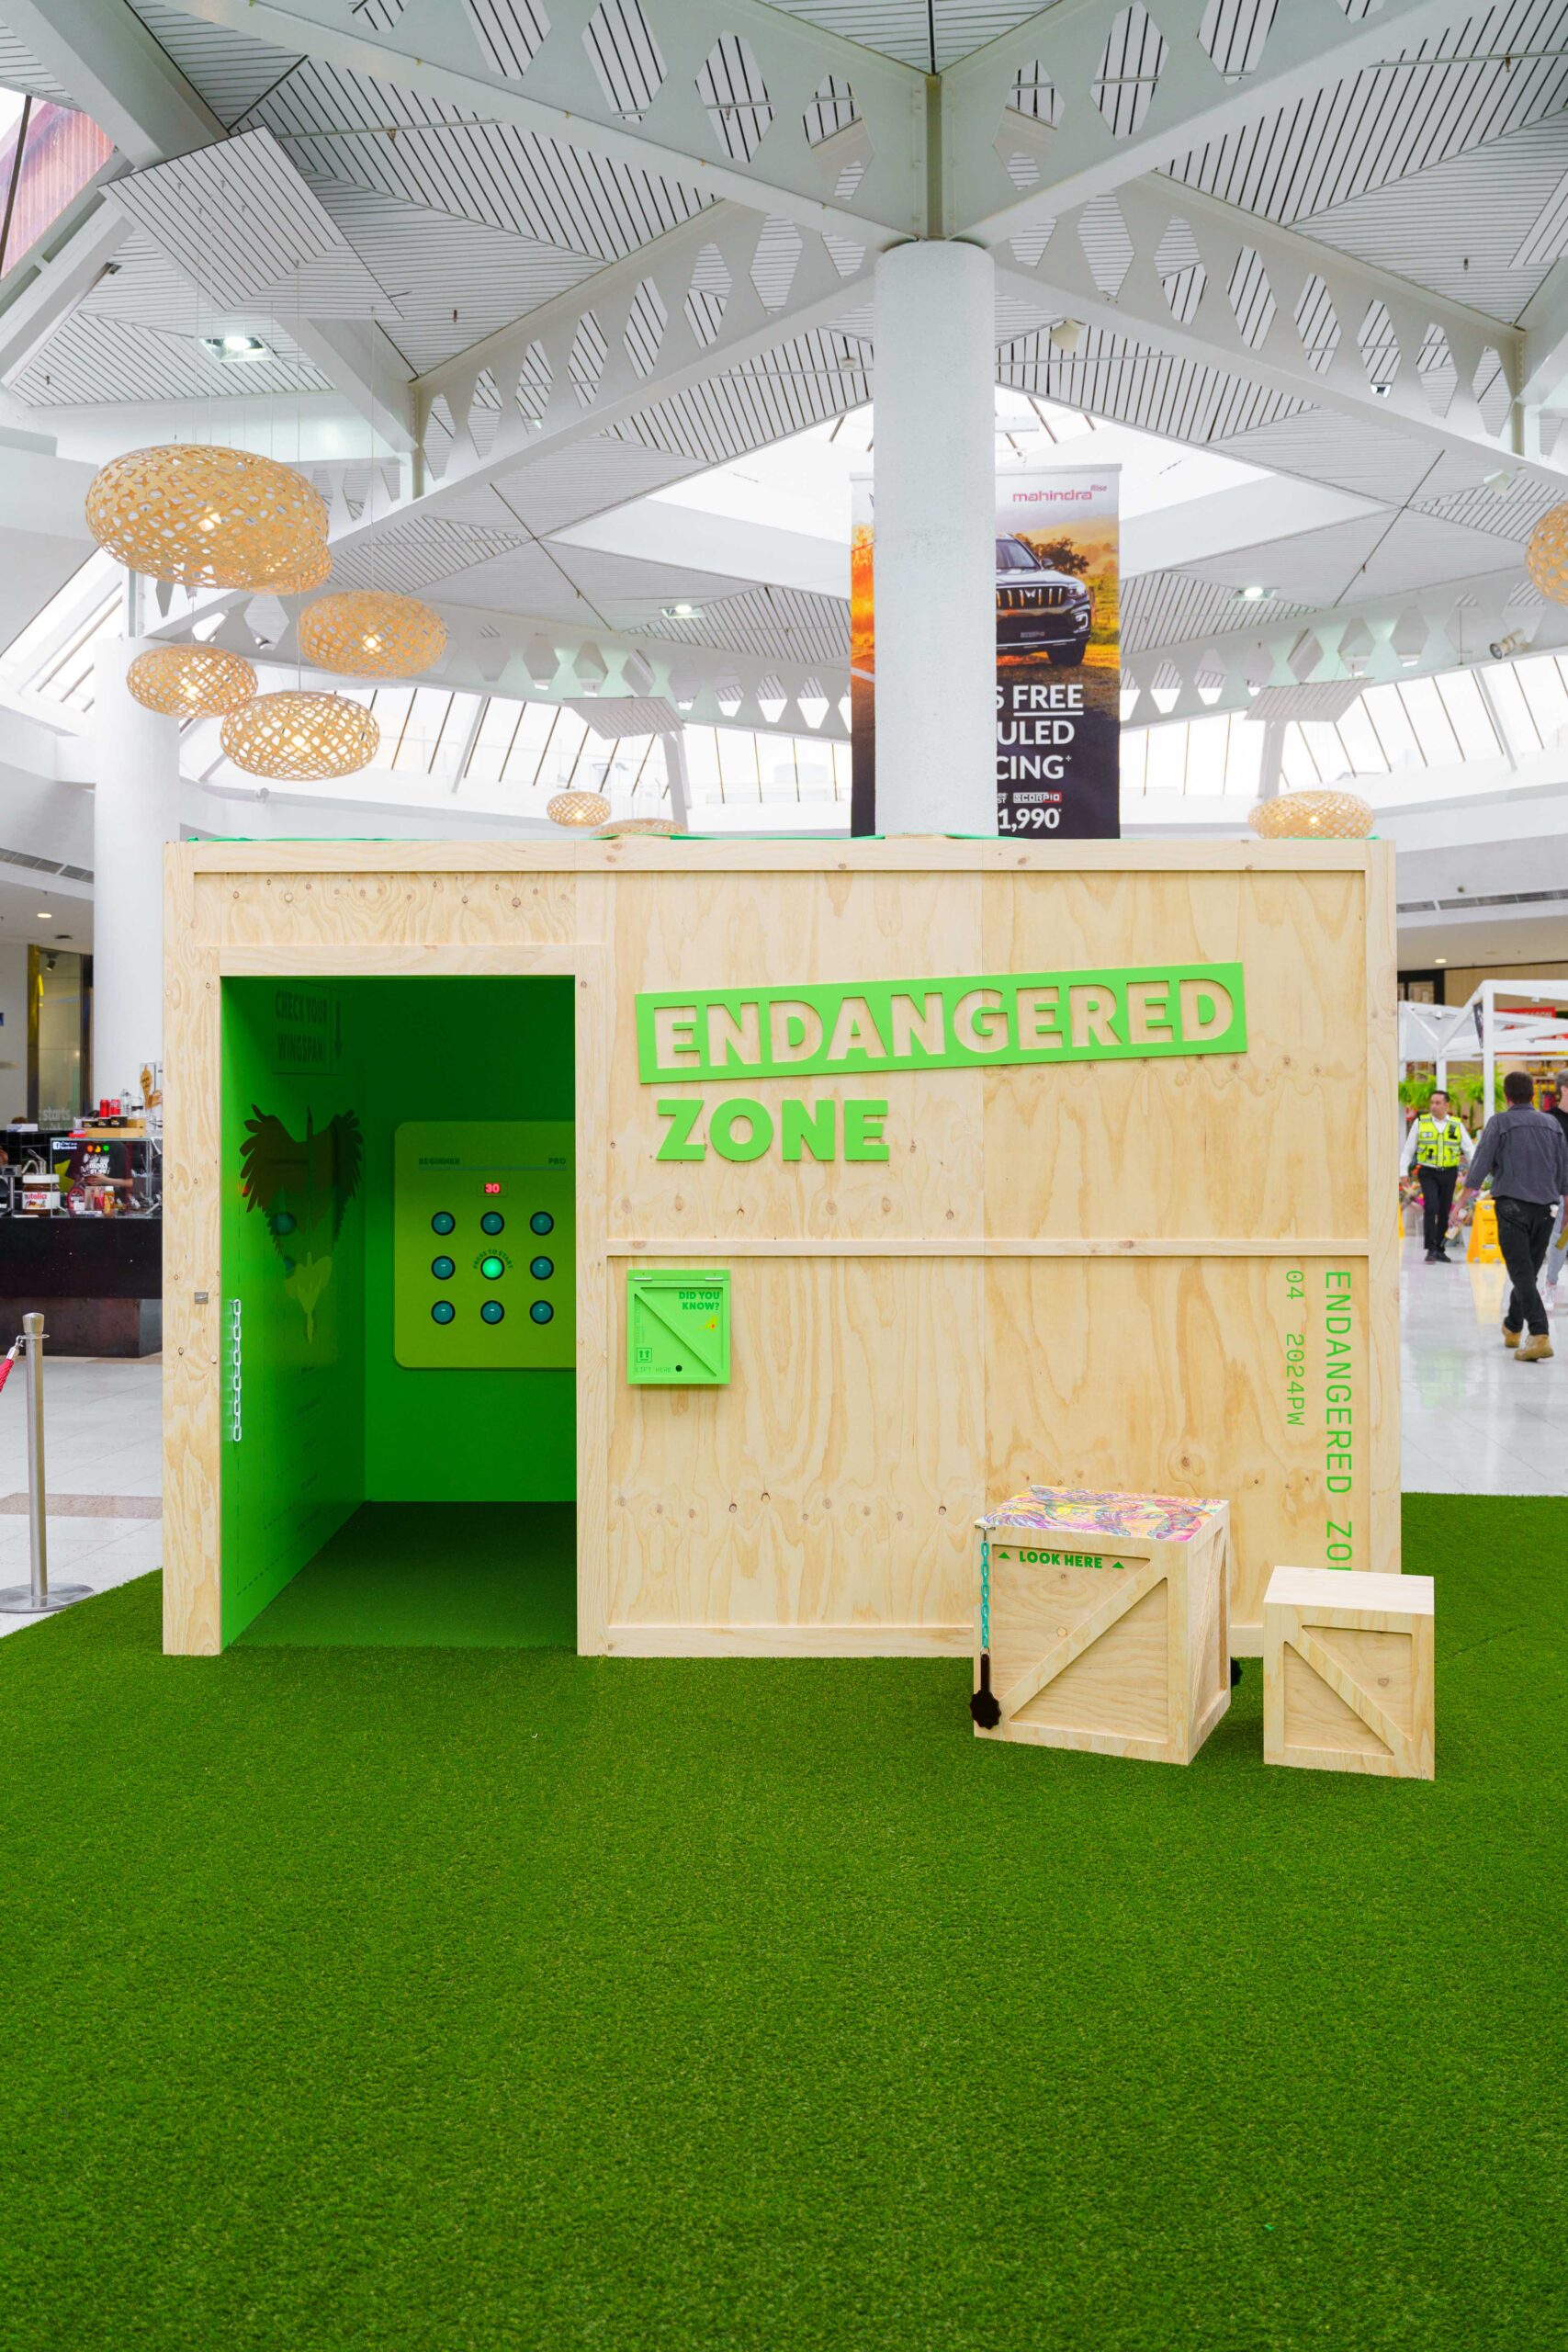 Wooden and Green Walkthrough, Enclosed Interactive Set for Kids on Endangered Species.